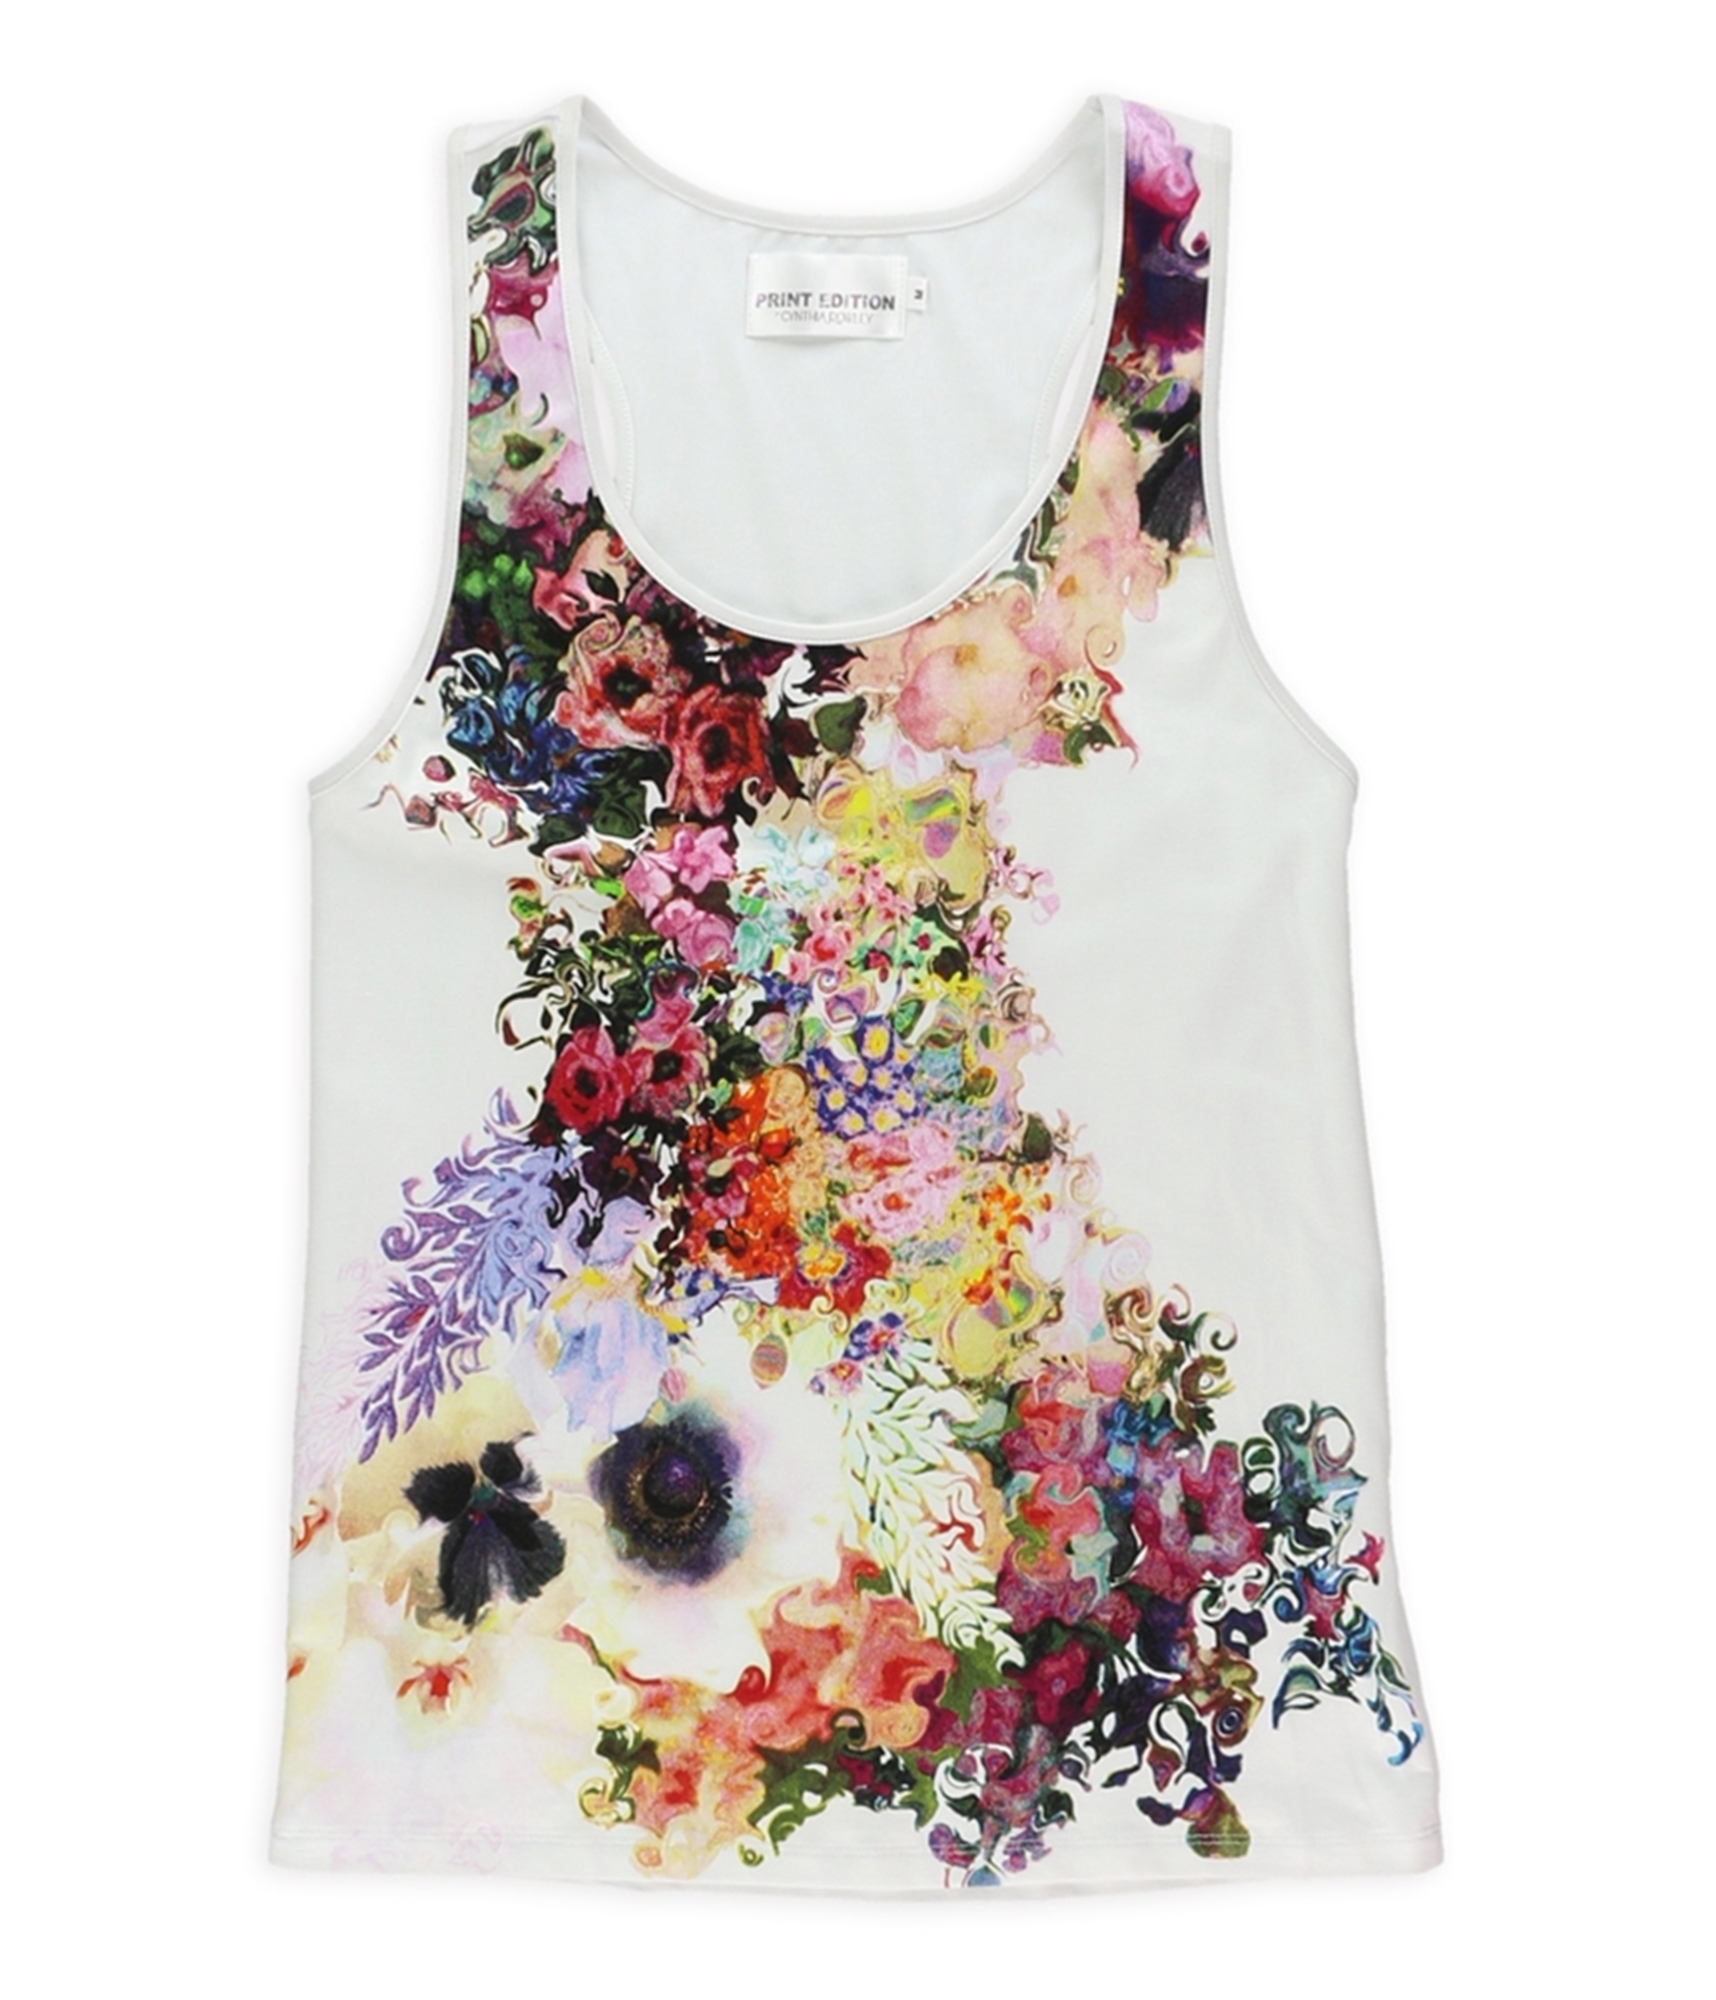 Buy a Womens Cynthia Rowley Floral Stretch Tank Top Online | TagsWeekly.com